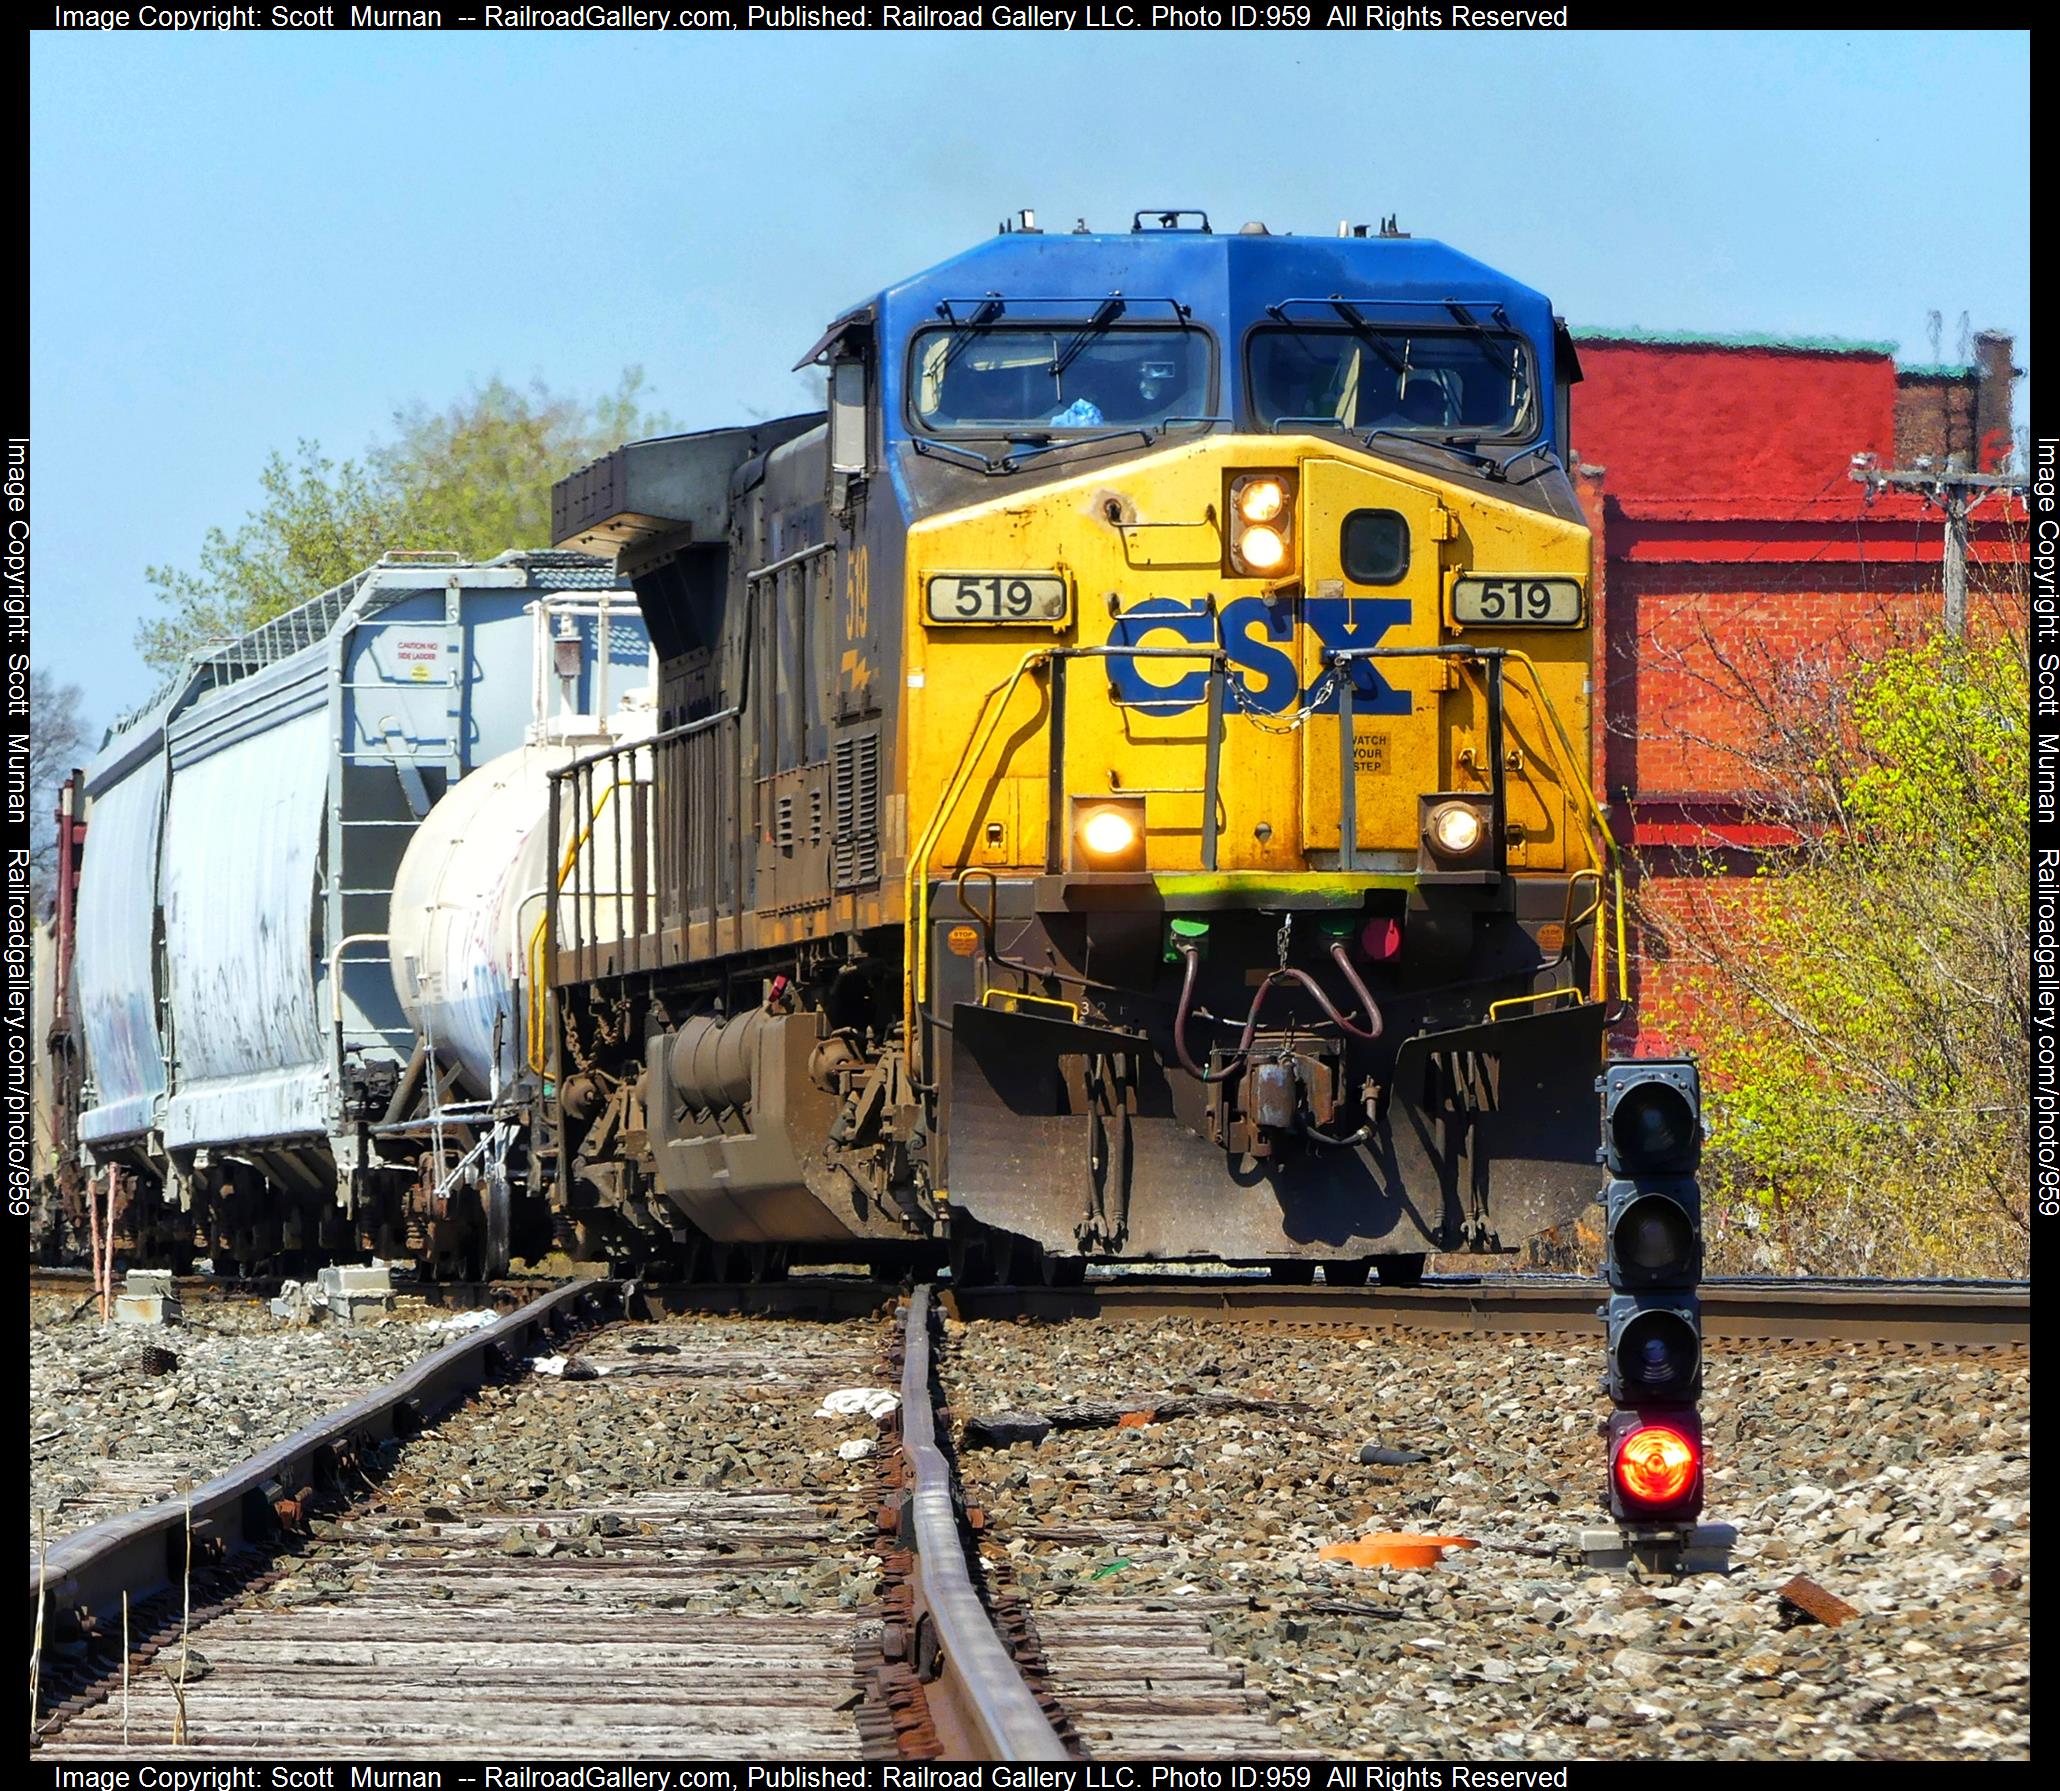 CSX 519 is a class GE AC4400CW and  is pictured in Rochester , New York, United States.  This was taken along the Rochester Subdivision  on the CSX Transportation. Photo Copyright: Scott  Murnan  uploaded to Railroad Gallery on 04/14/2023. This photograph of CSX 519 was taken on Friday, April 14, 2023. All Rights Reserved. 